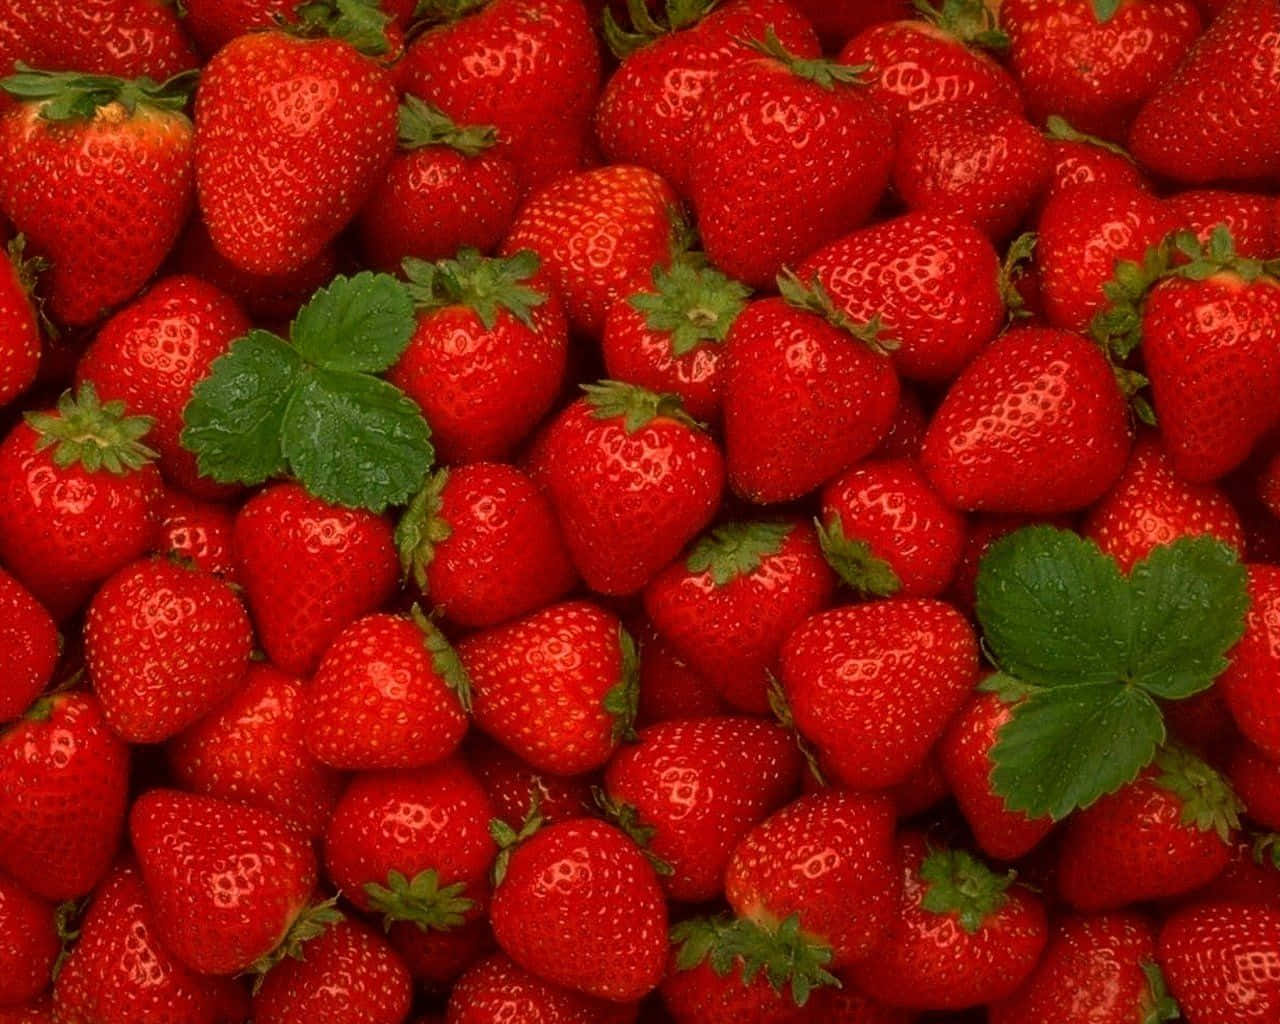 "Mouth-watering cute strawberry ripe for picking" Wallpaper